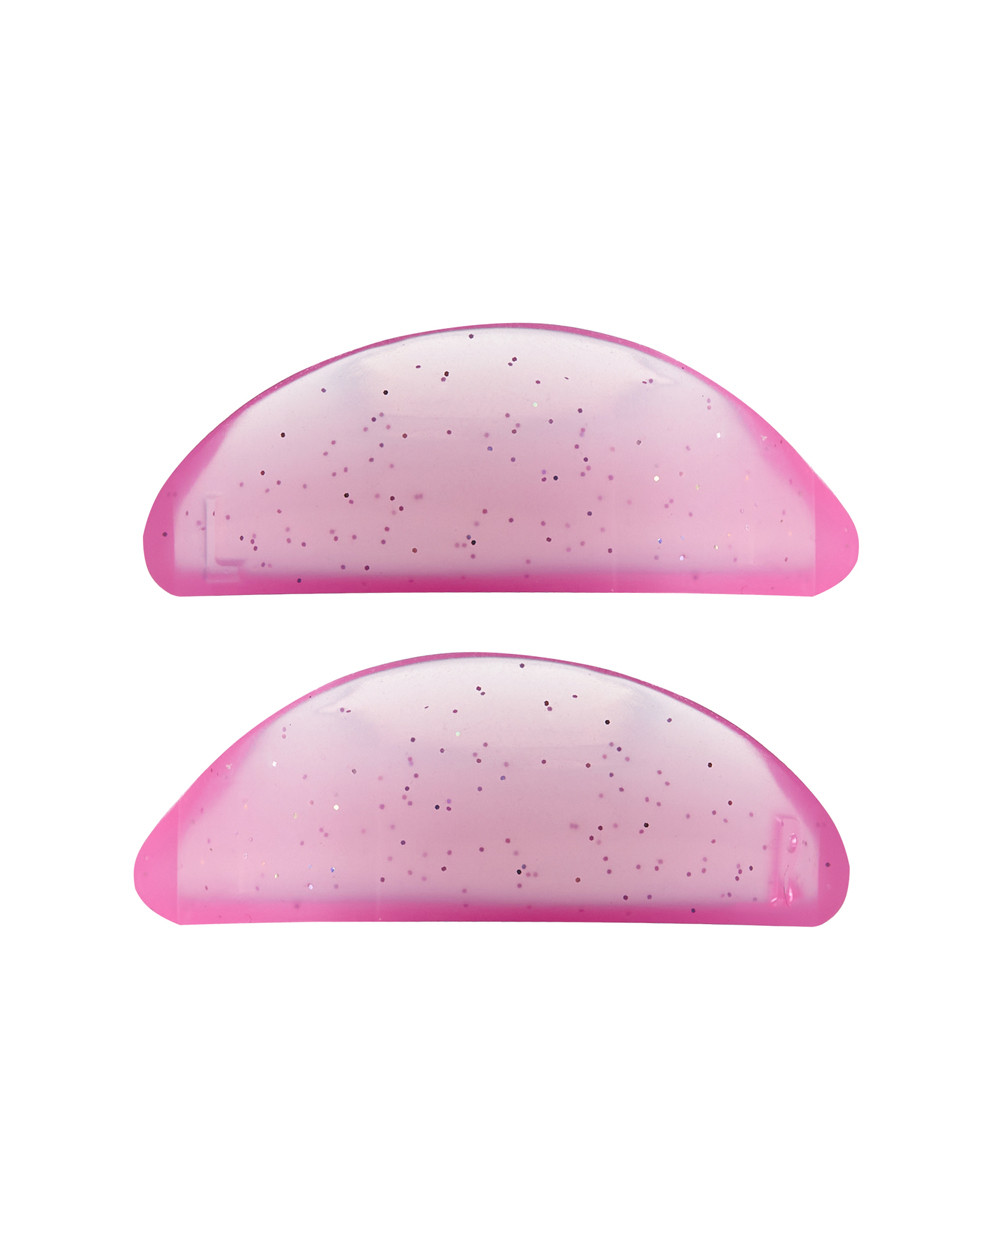 ✨ How To Clean Your Silicone Pad ✨ #ParisLashAcademy #Pink